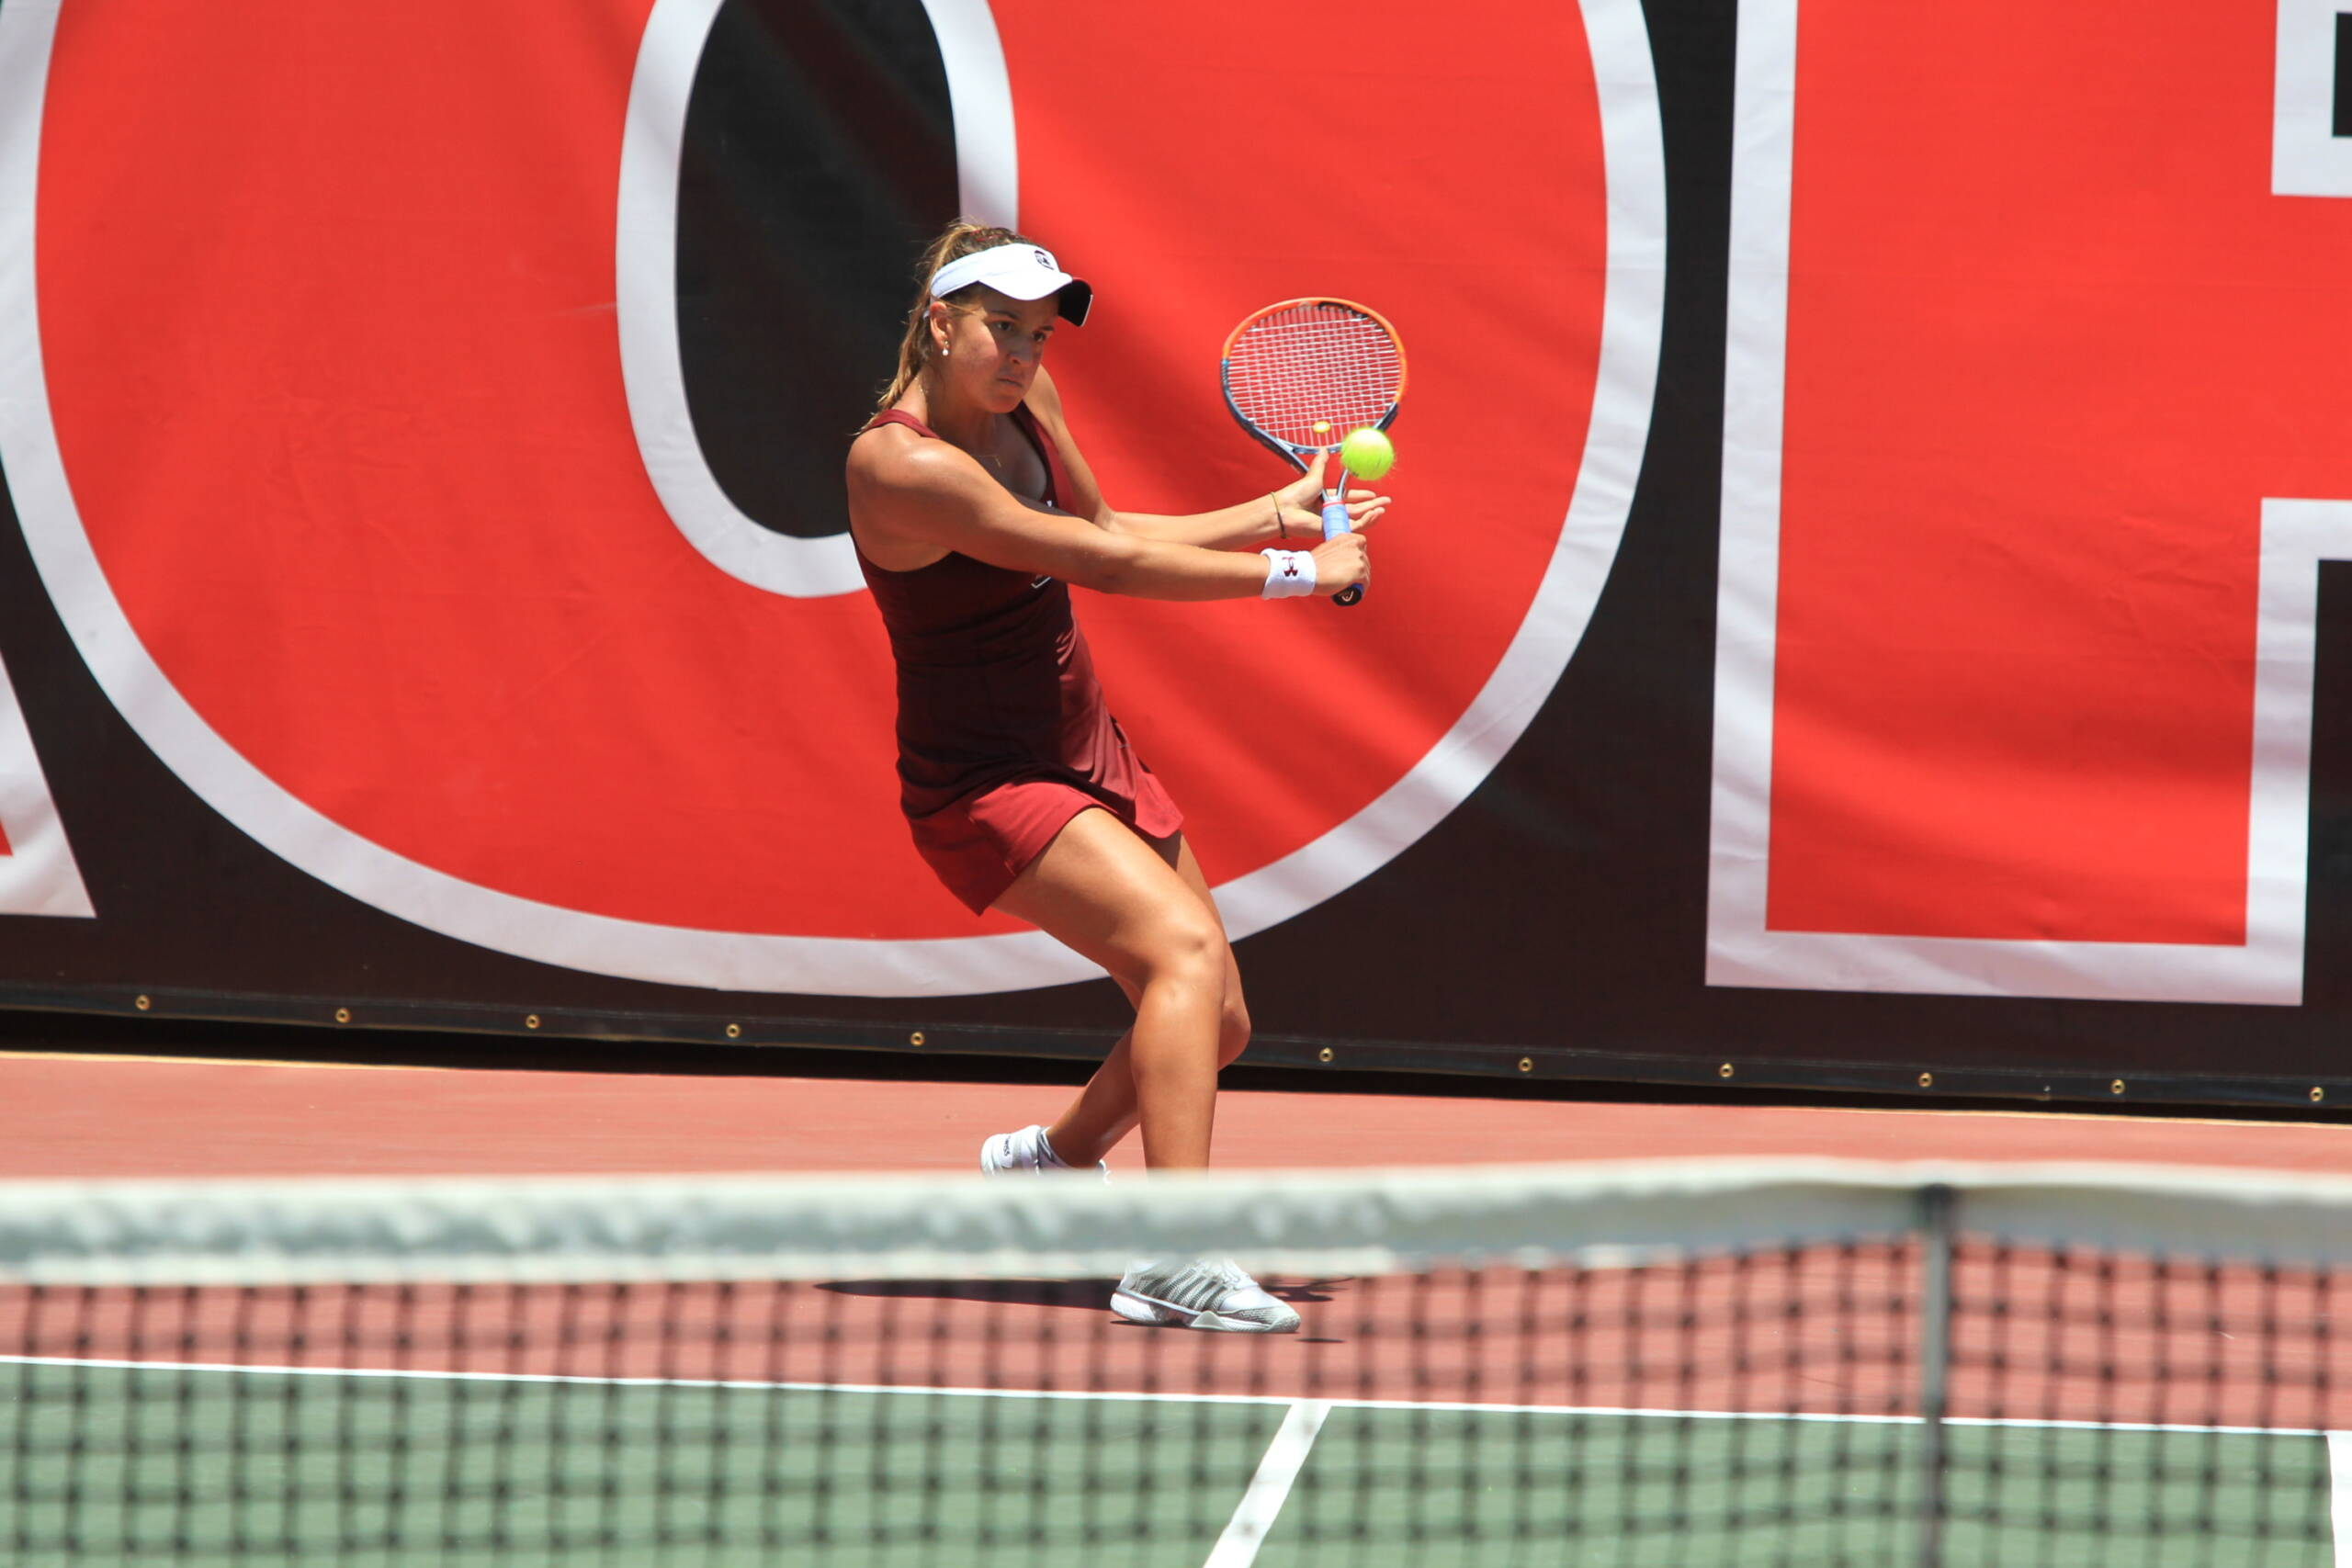 Martins Advances to Second Round of NCAA Singles